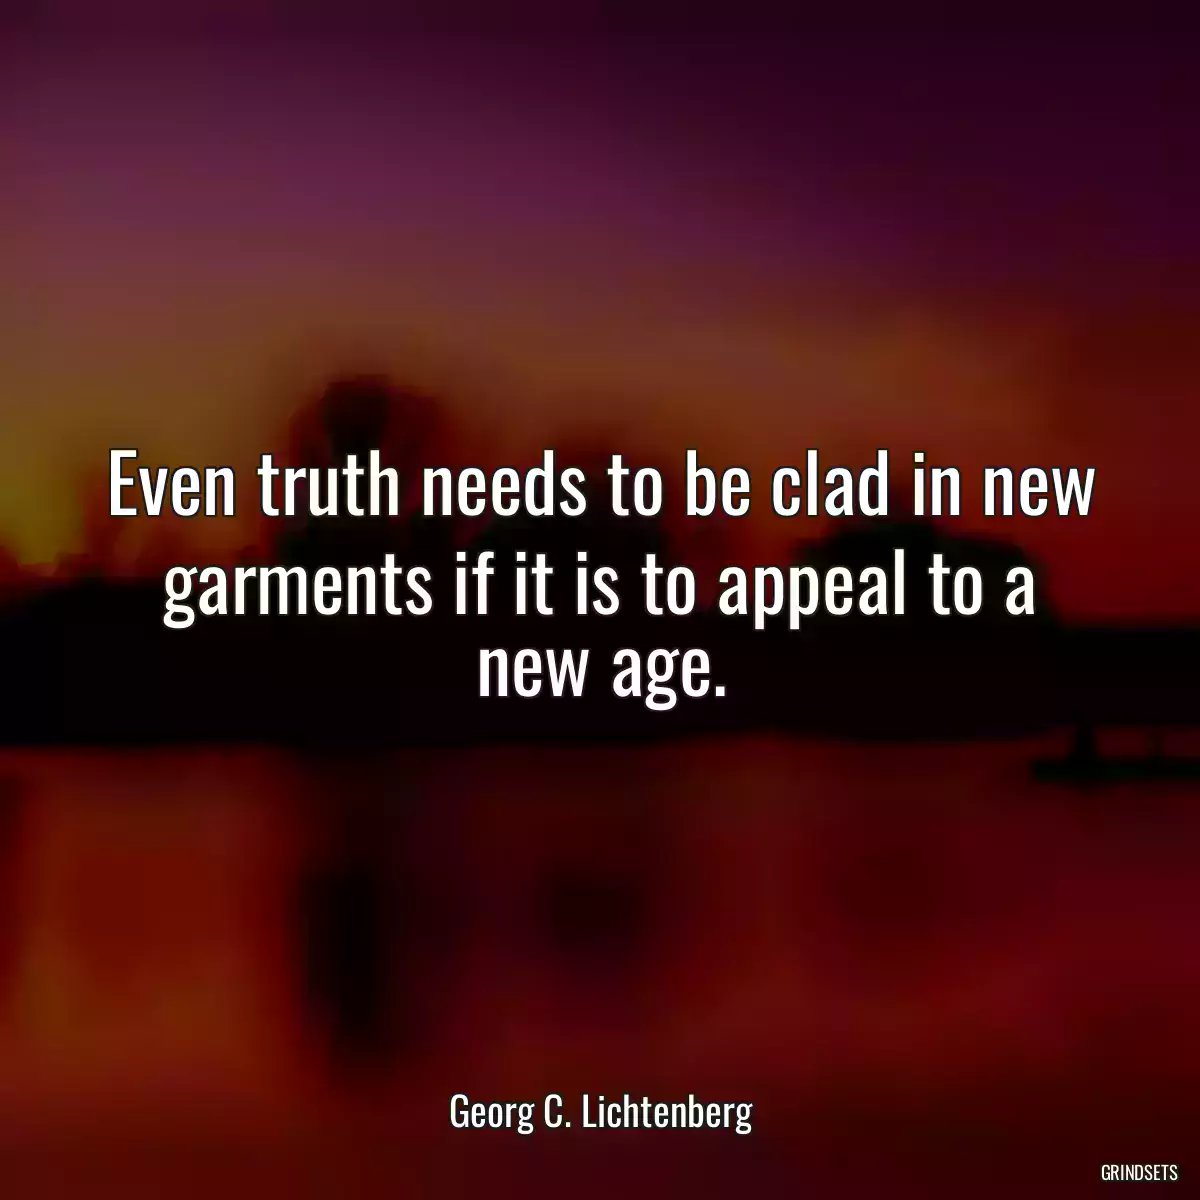 Even truth needs to be clad in new garments if it is to appeal to a new age.